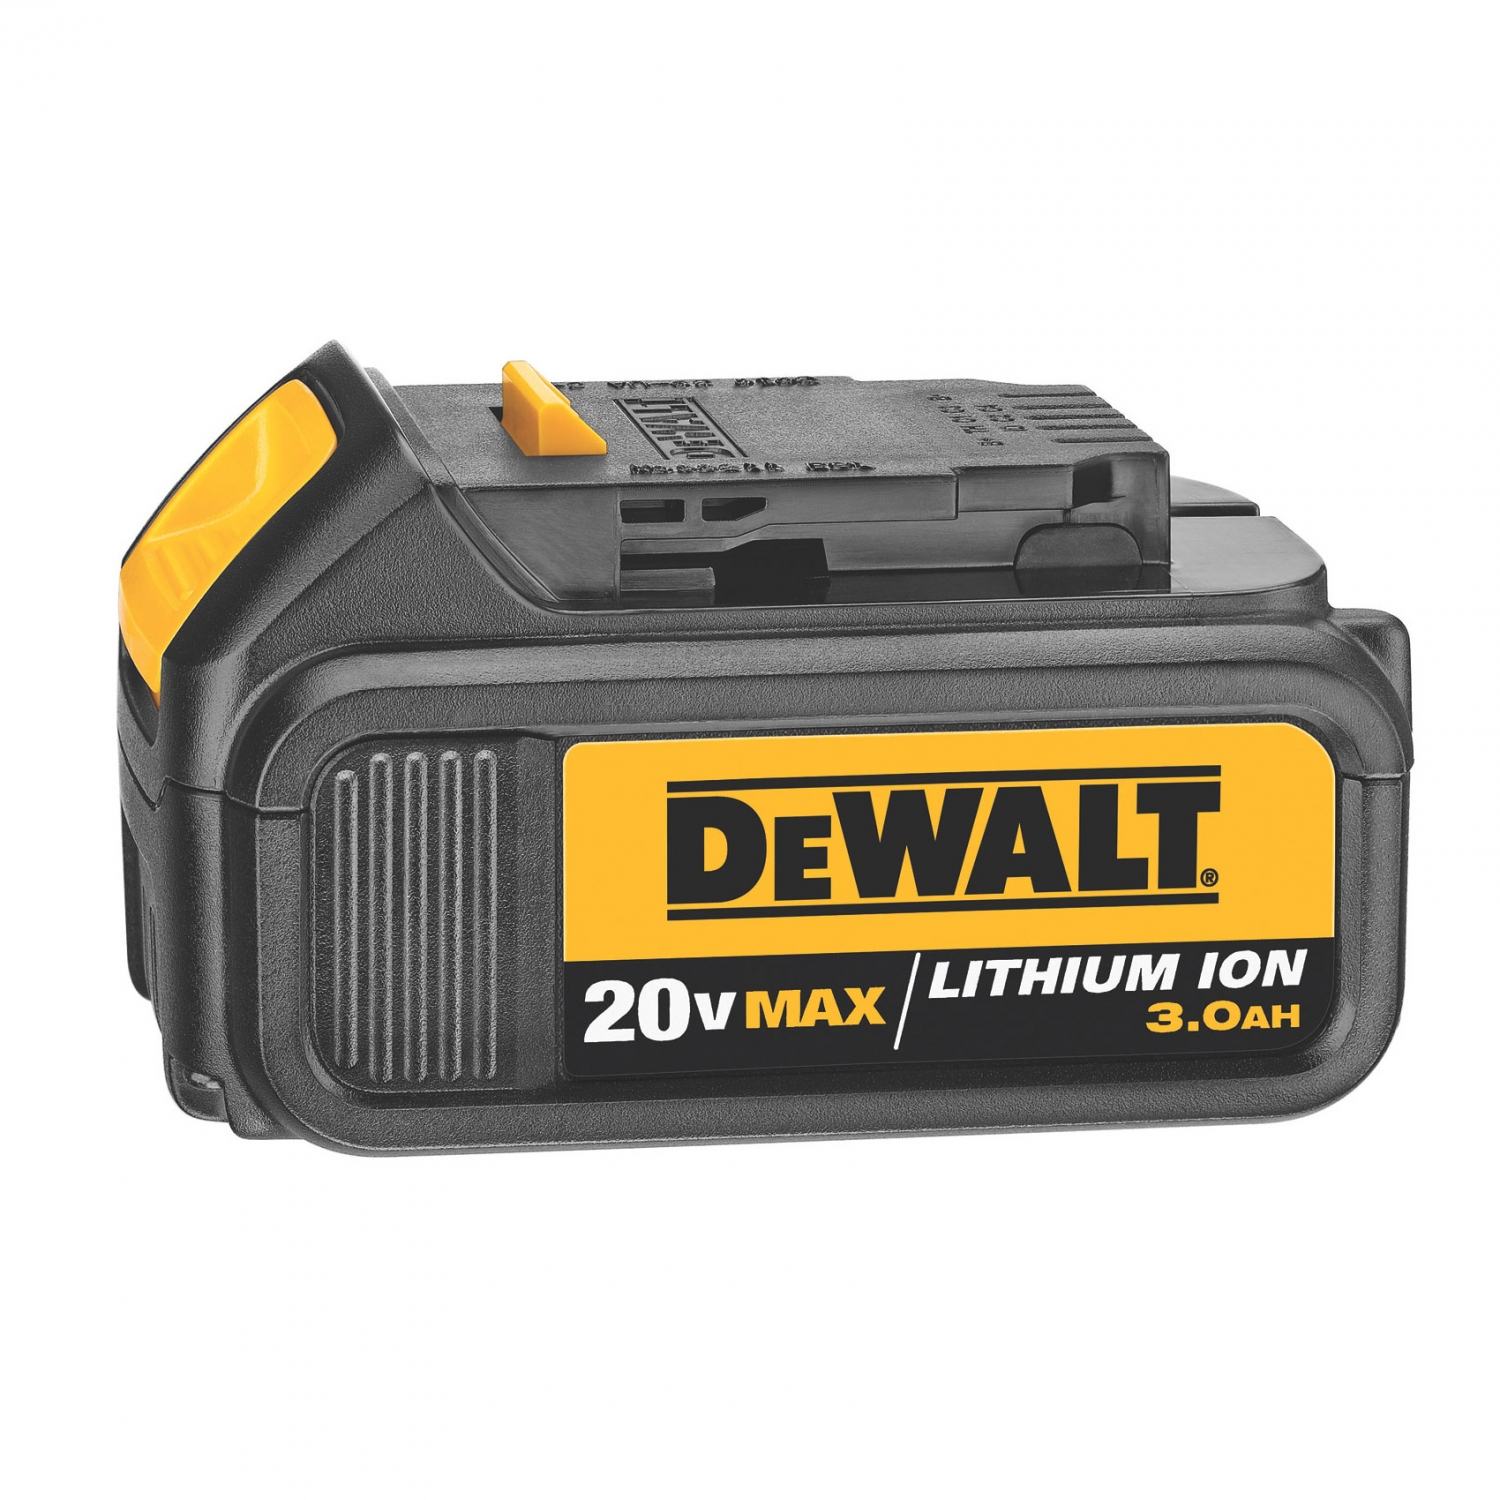 dewalt 20 volt battery will not charge